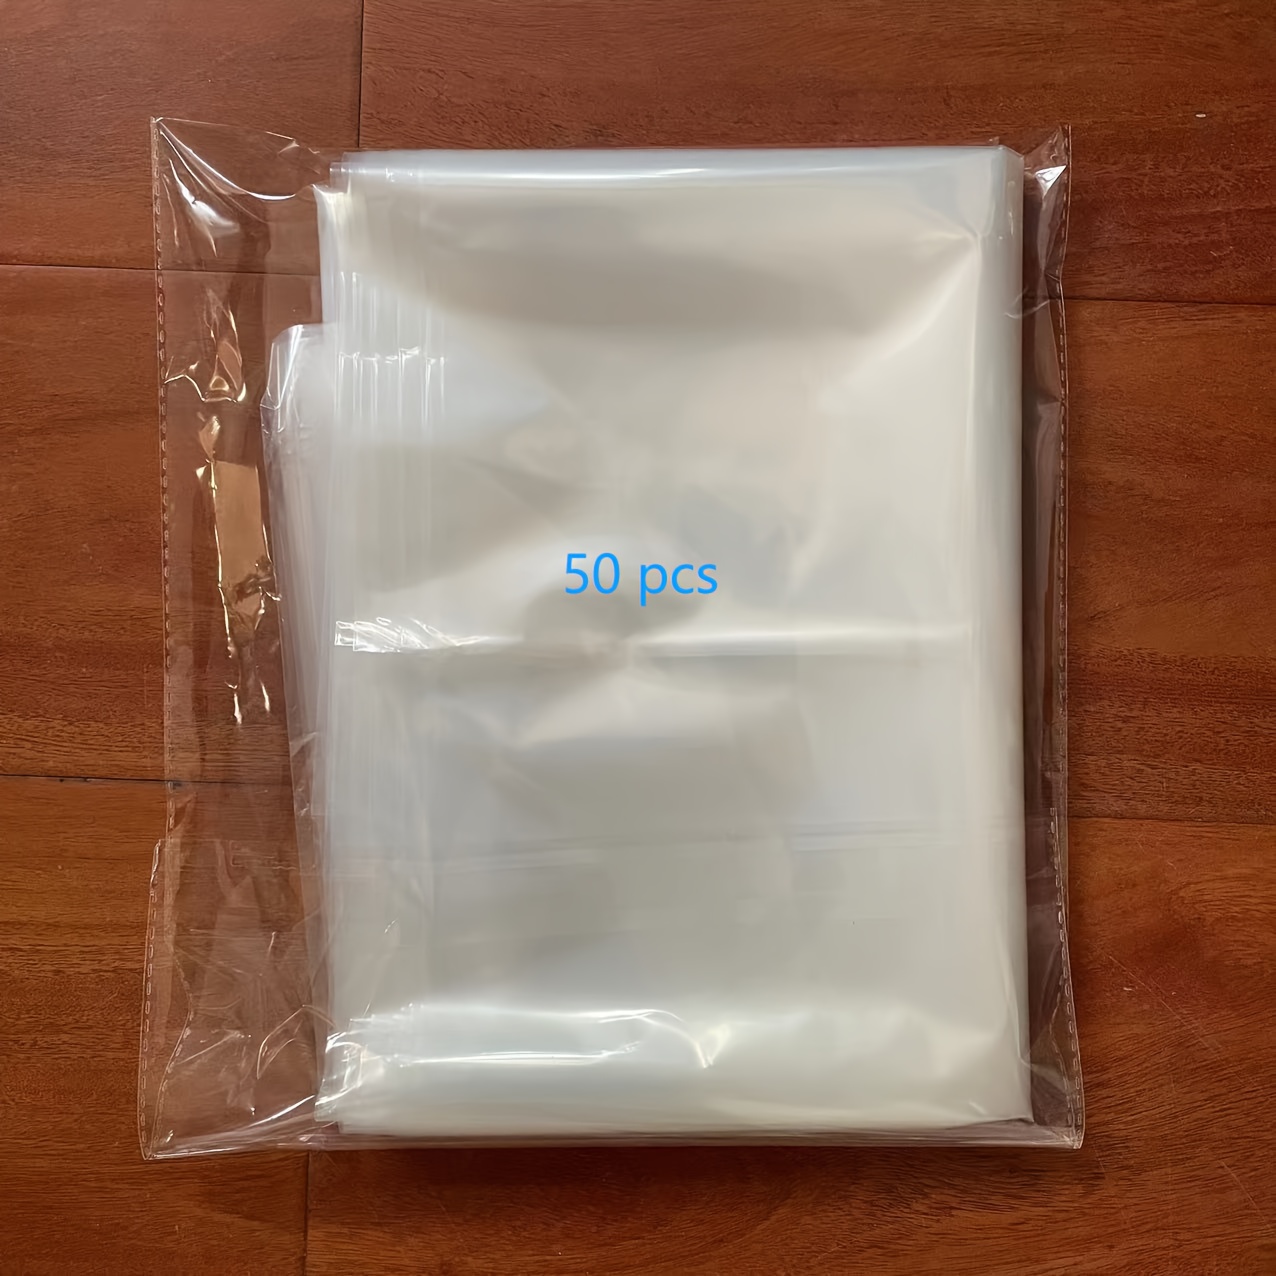 55-60 Gal Large Trash Bags 50-Pcs Clear Plastic Recycling Garbage